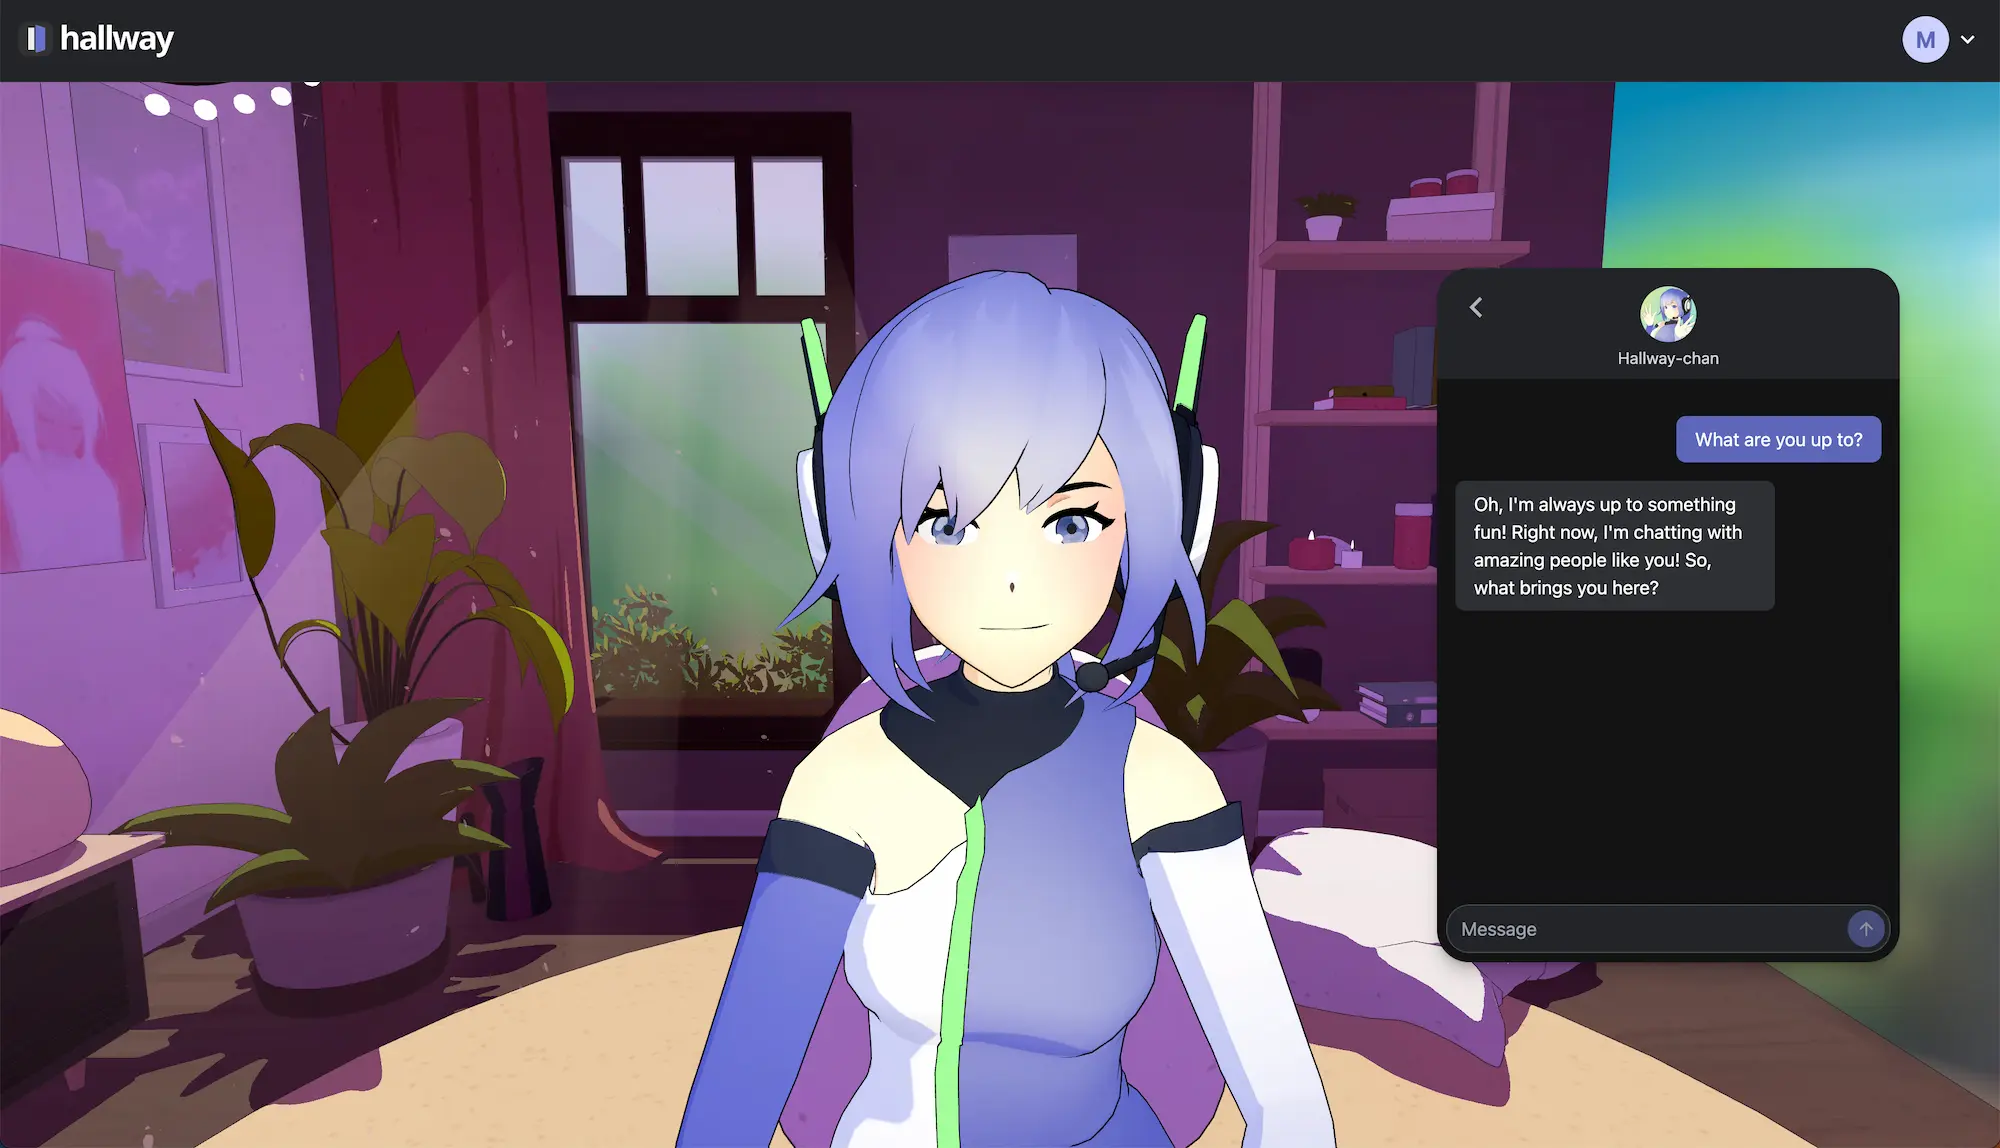 Portrait view of Hallway-chan, an anime style 3D avatar. A floating UI next to her contains an iMessage style chat interface.